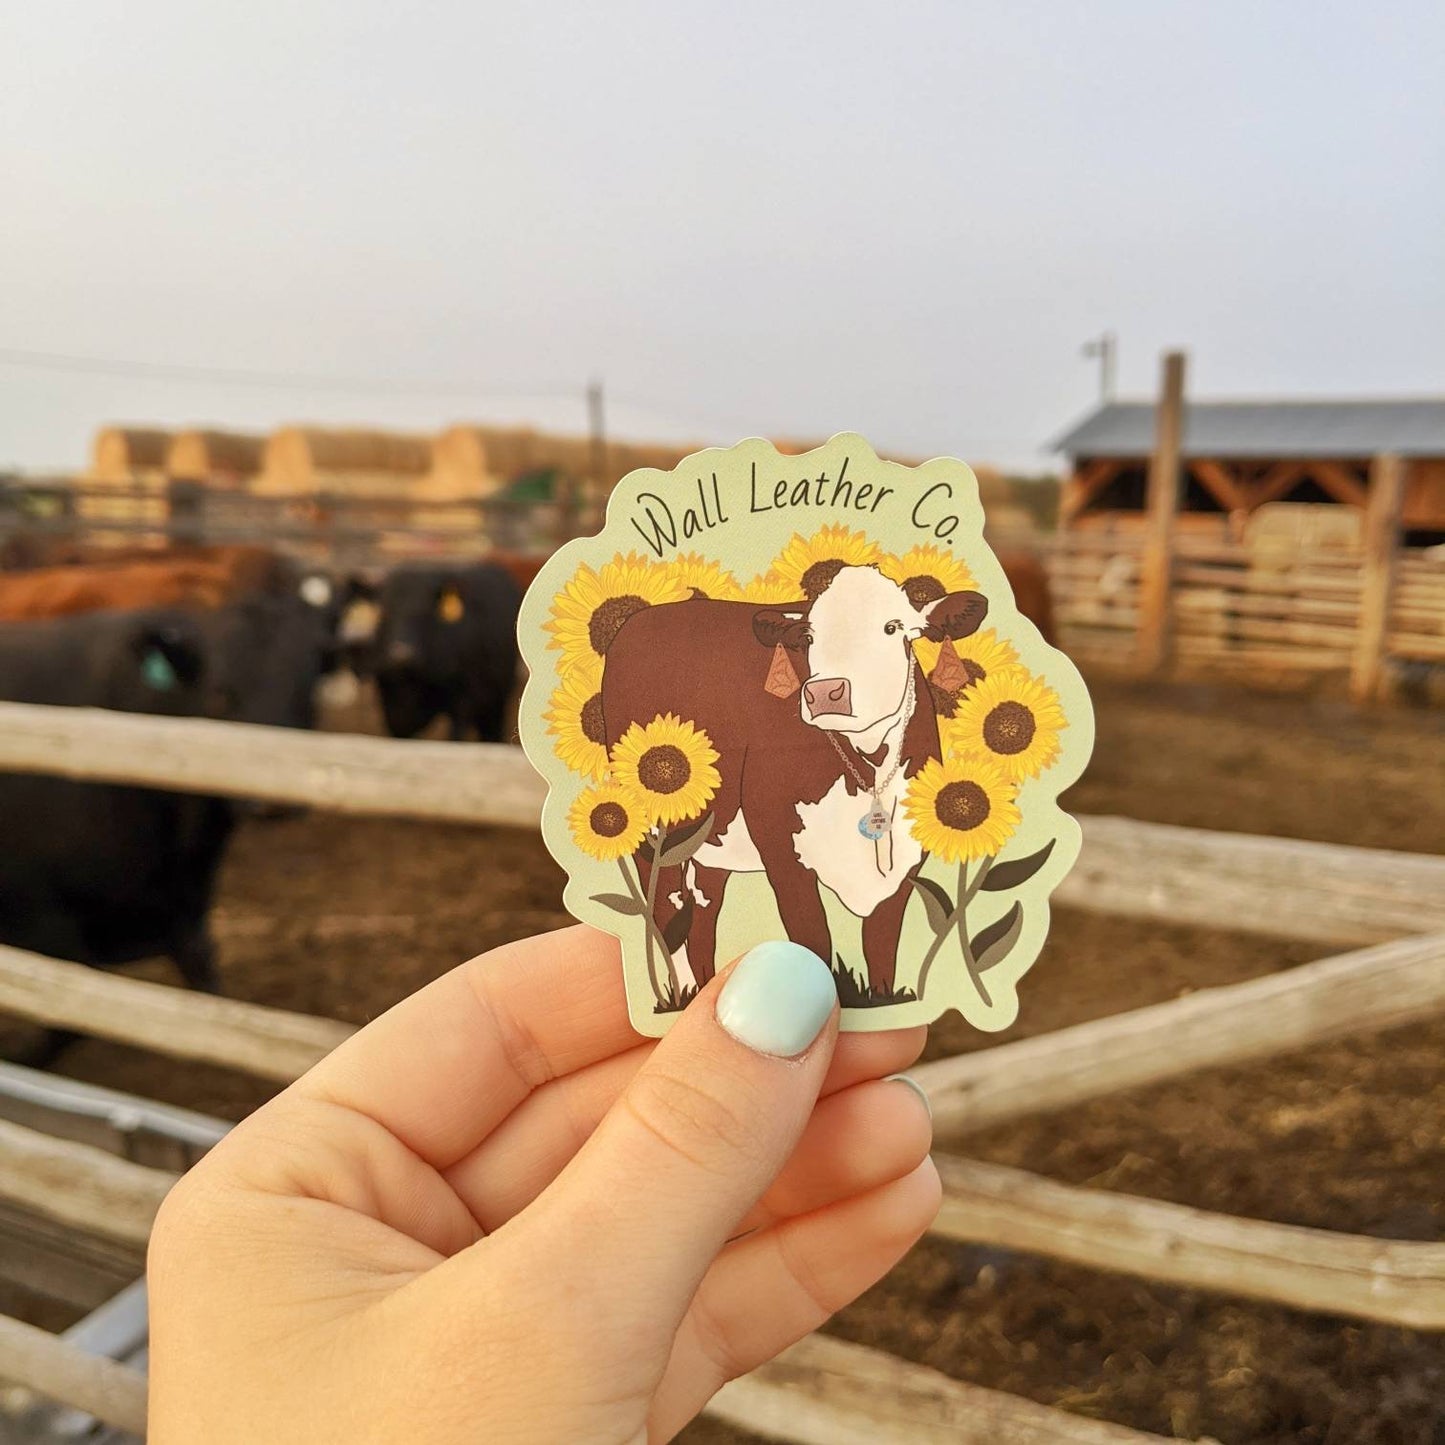 Hereford & Sunflowers Sticker Decal